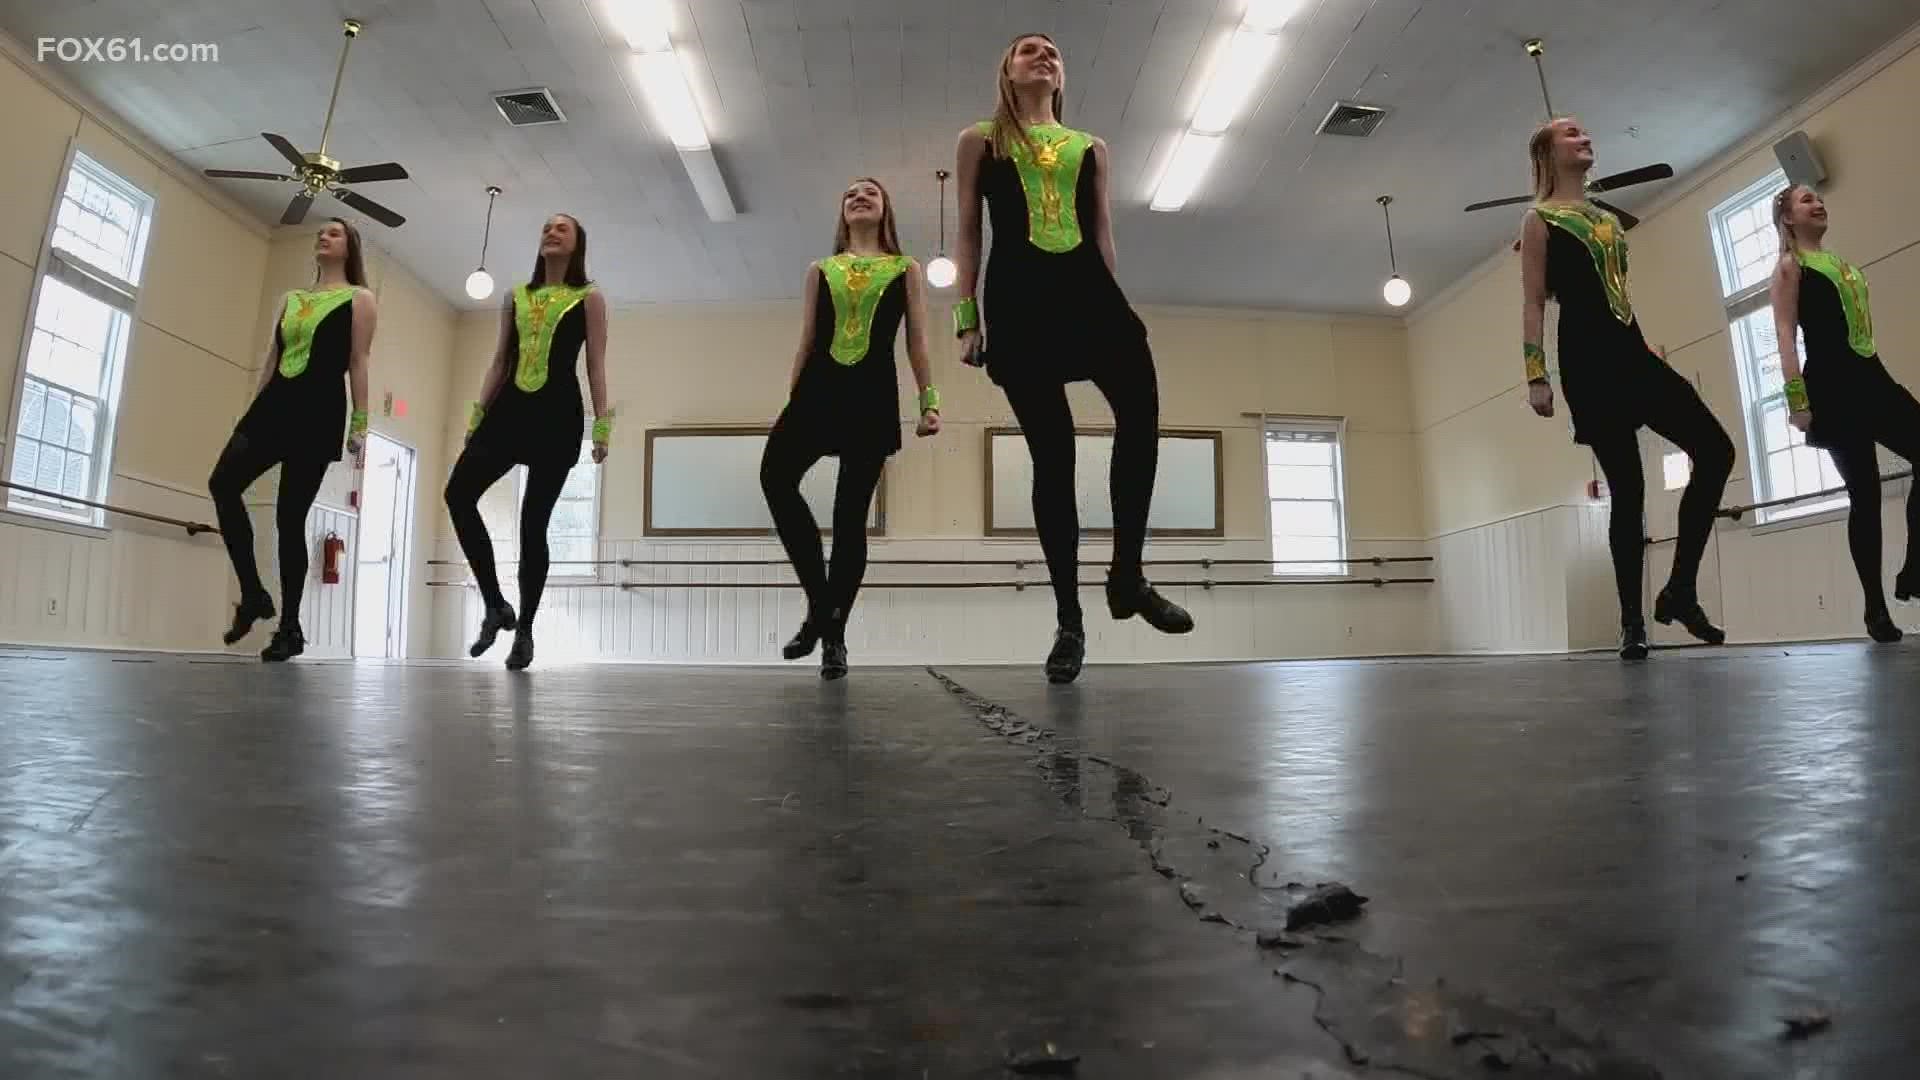 After three years, The Irish Step Dancers from Griffith Academy in Wethersfield are back in a rhythm for the Greater Hartford St. Patrick’s Day Parade